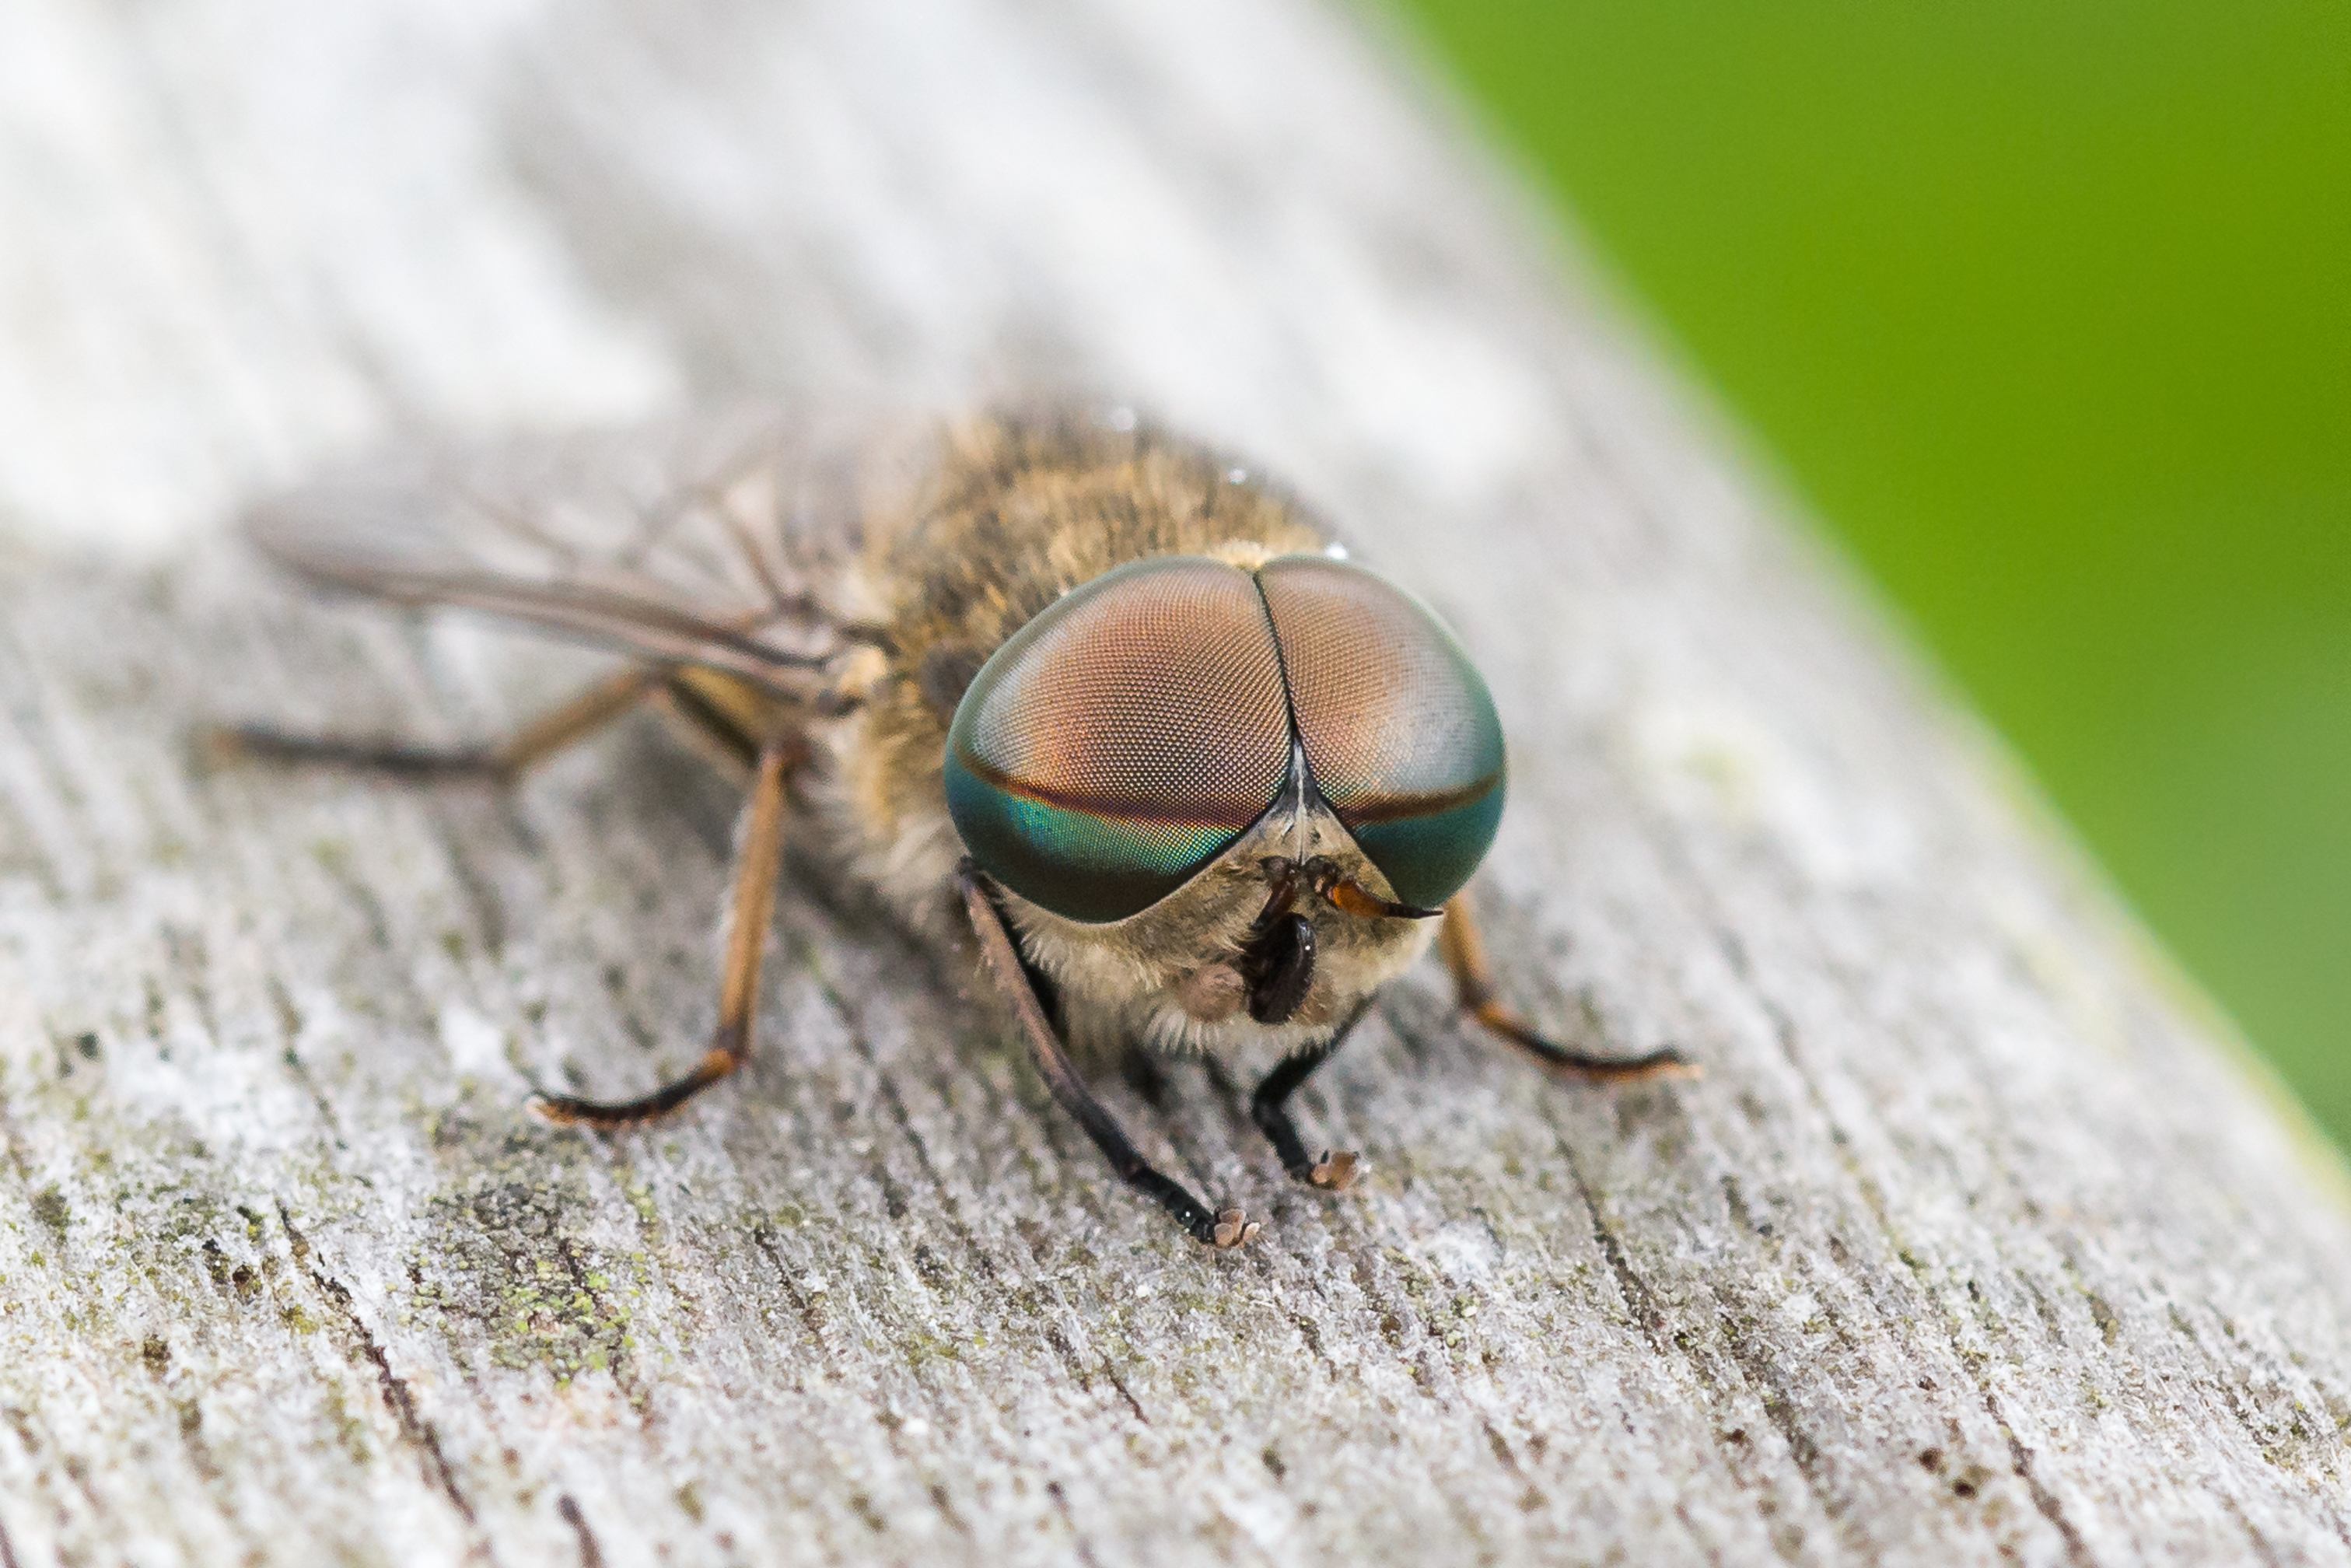 34+ Show me a picture of a horsefly ideas